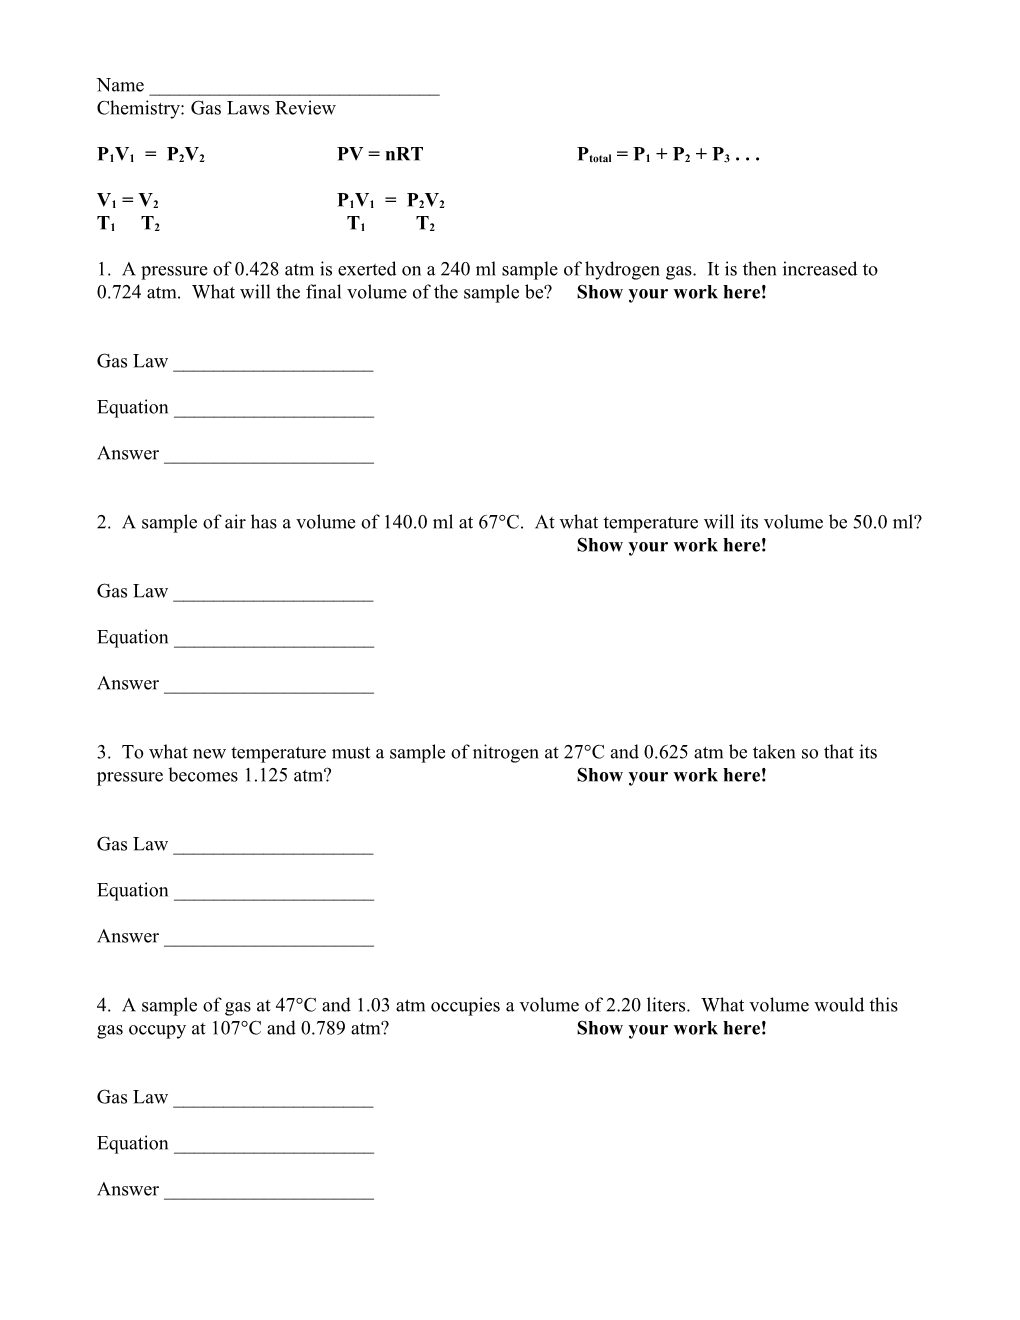 Chemistry: Gas Laws Review